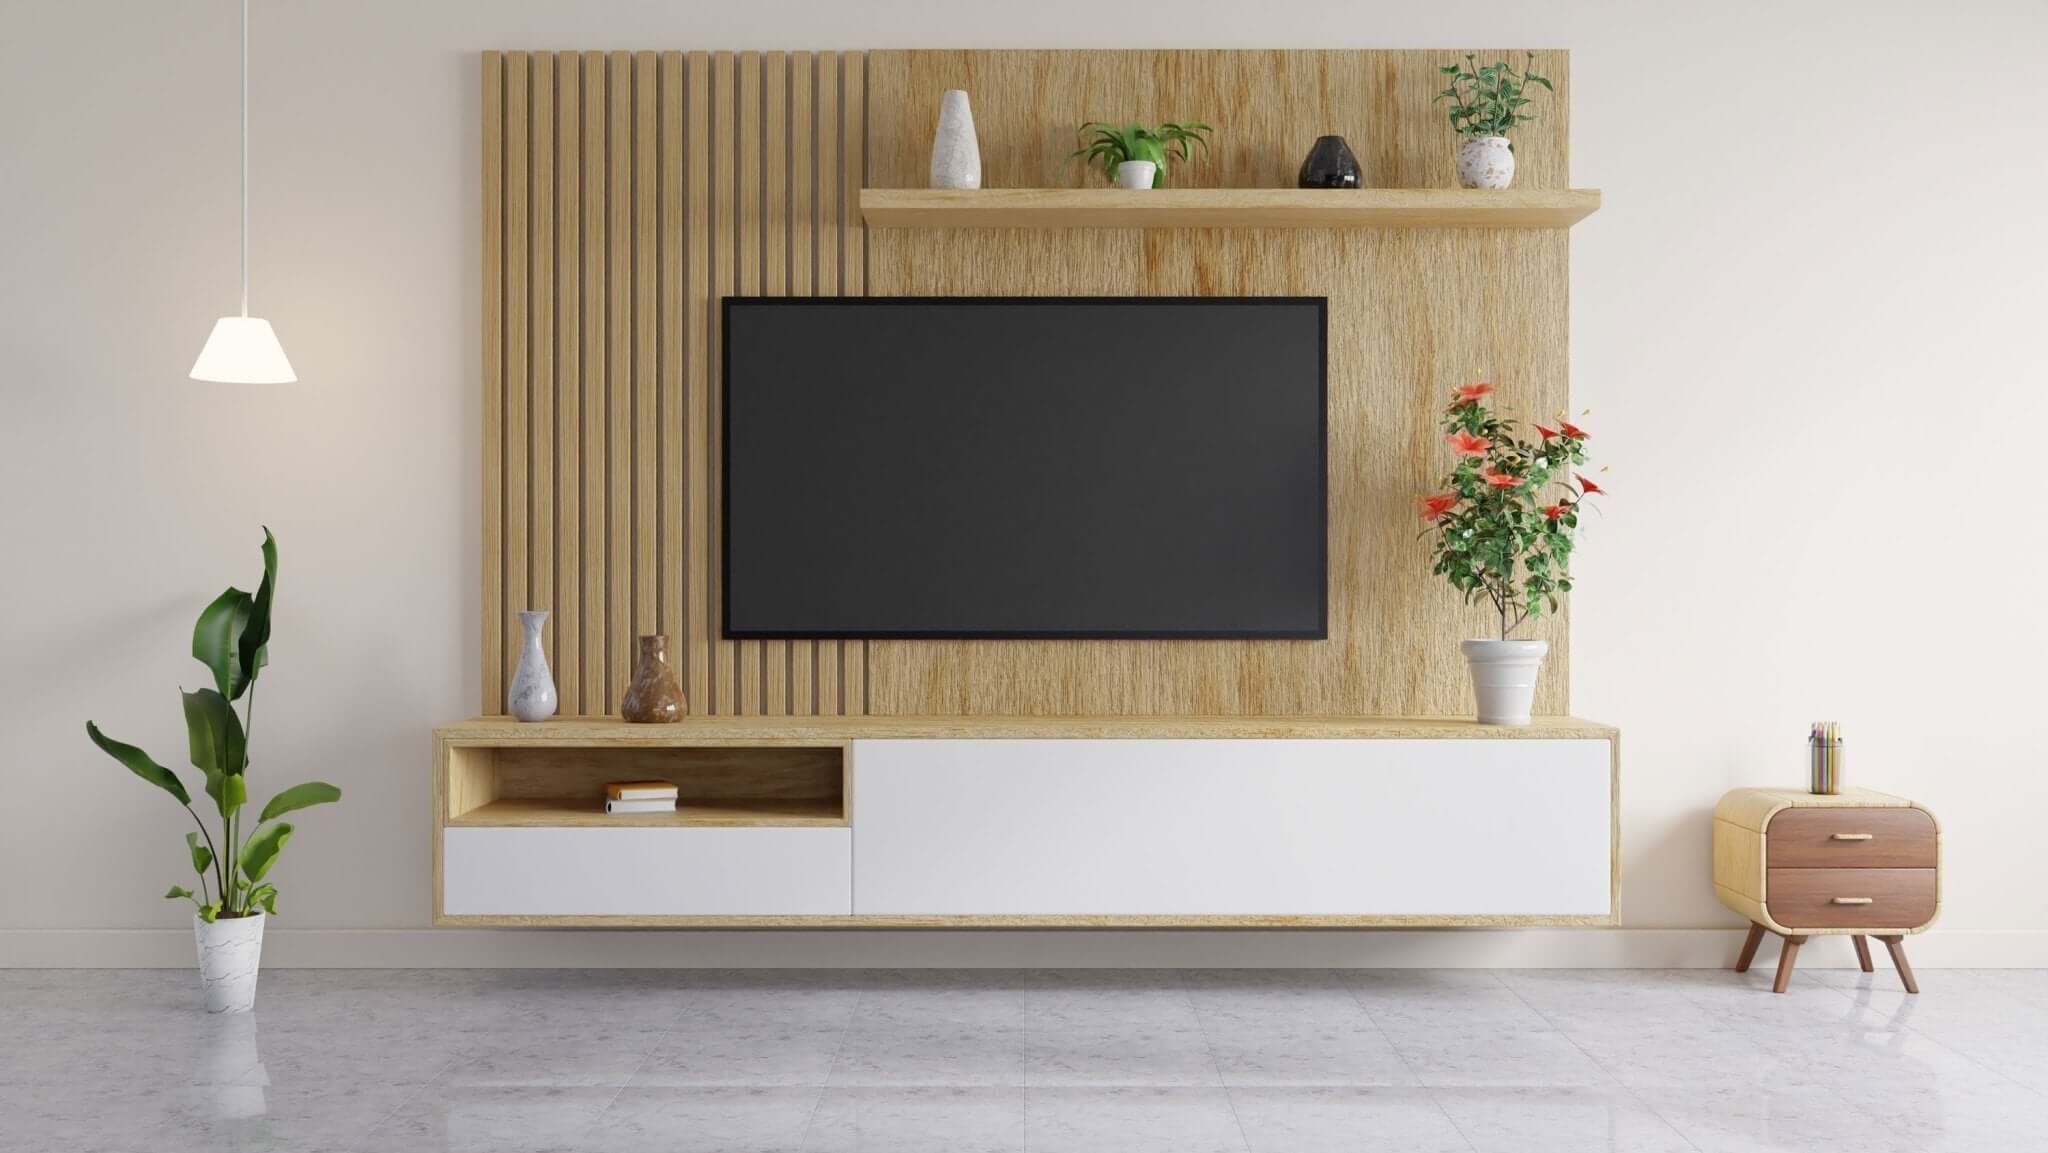 Wall Mounted TV Unit Designs  10 Trending Ideas for Your TV Wall